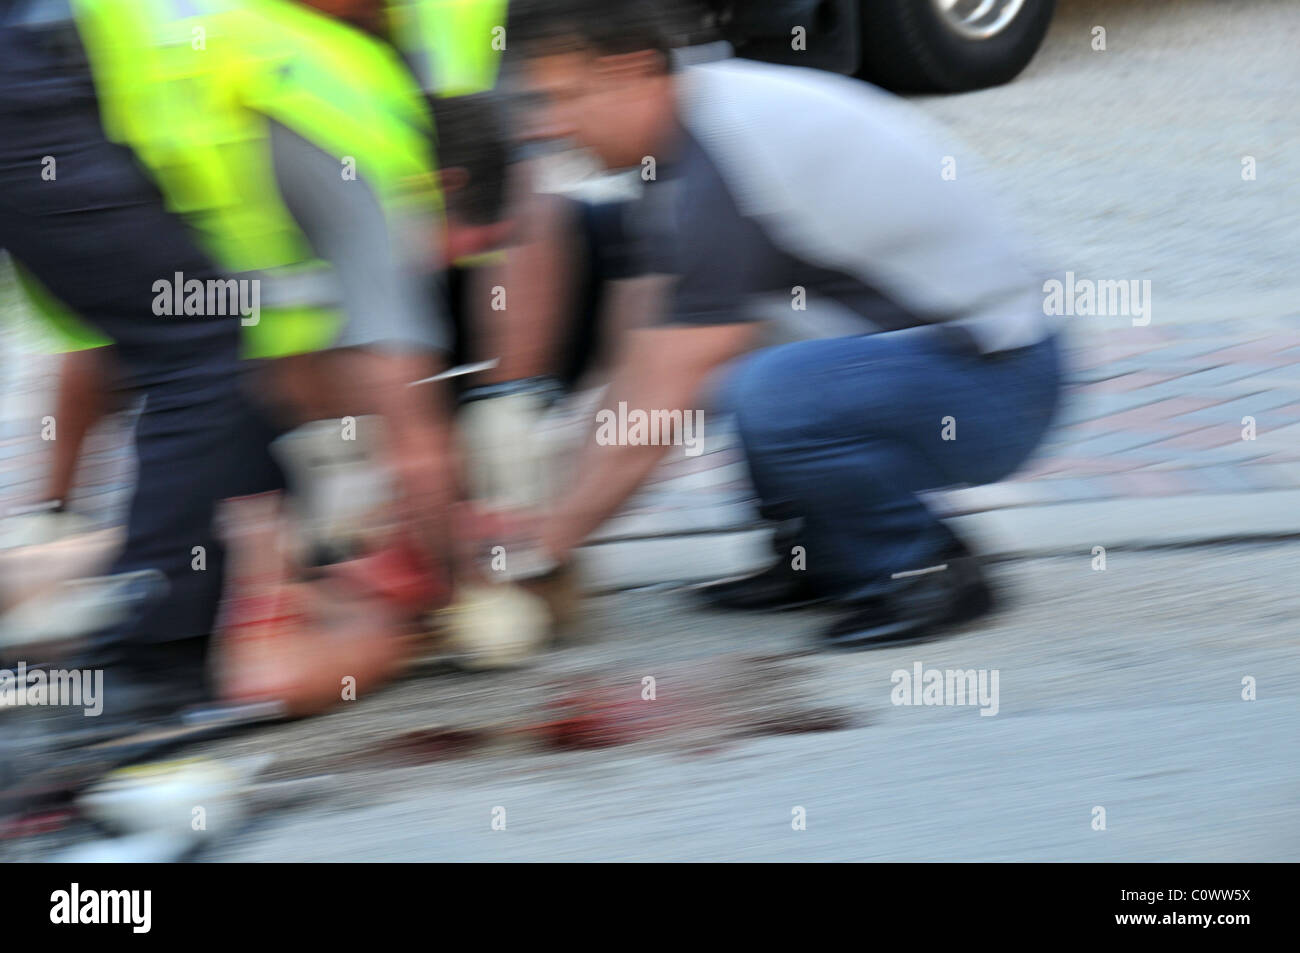 Ambulance personnel caring for accident victim. Stock Photo